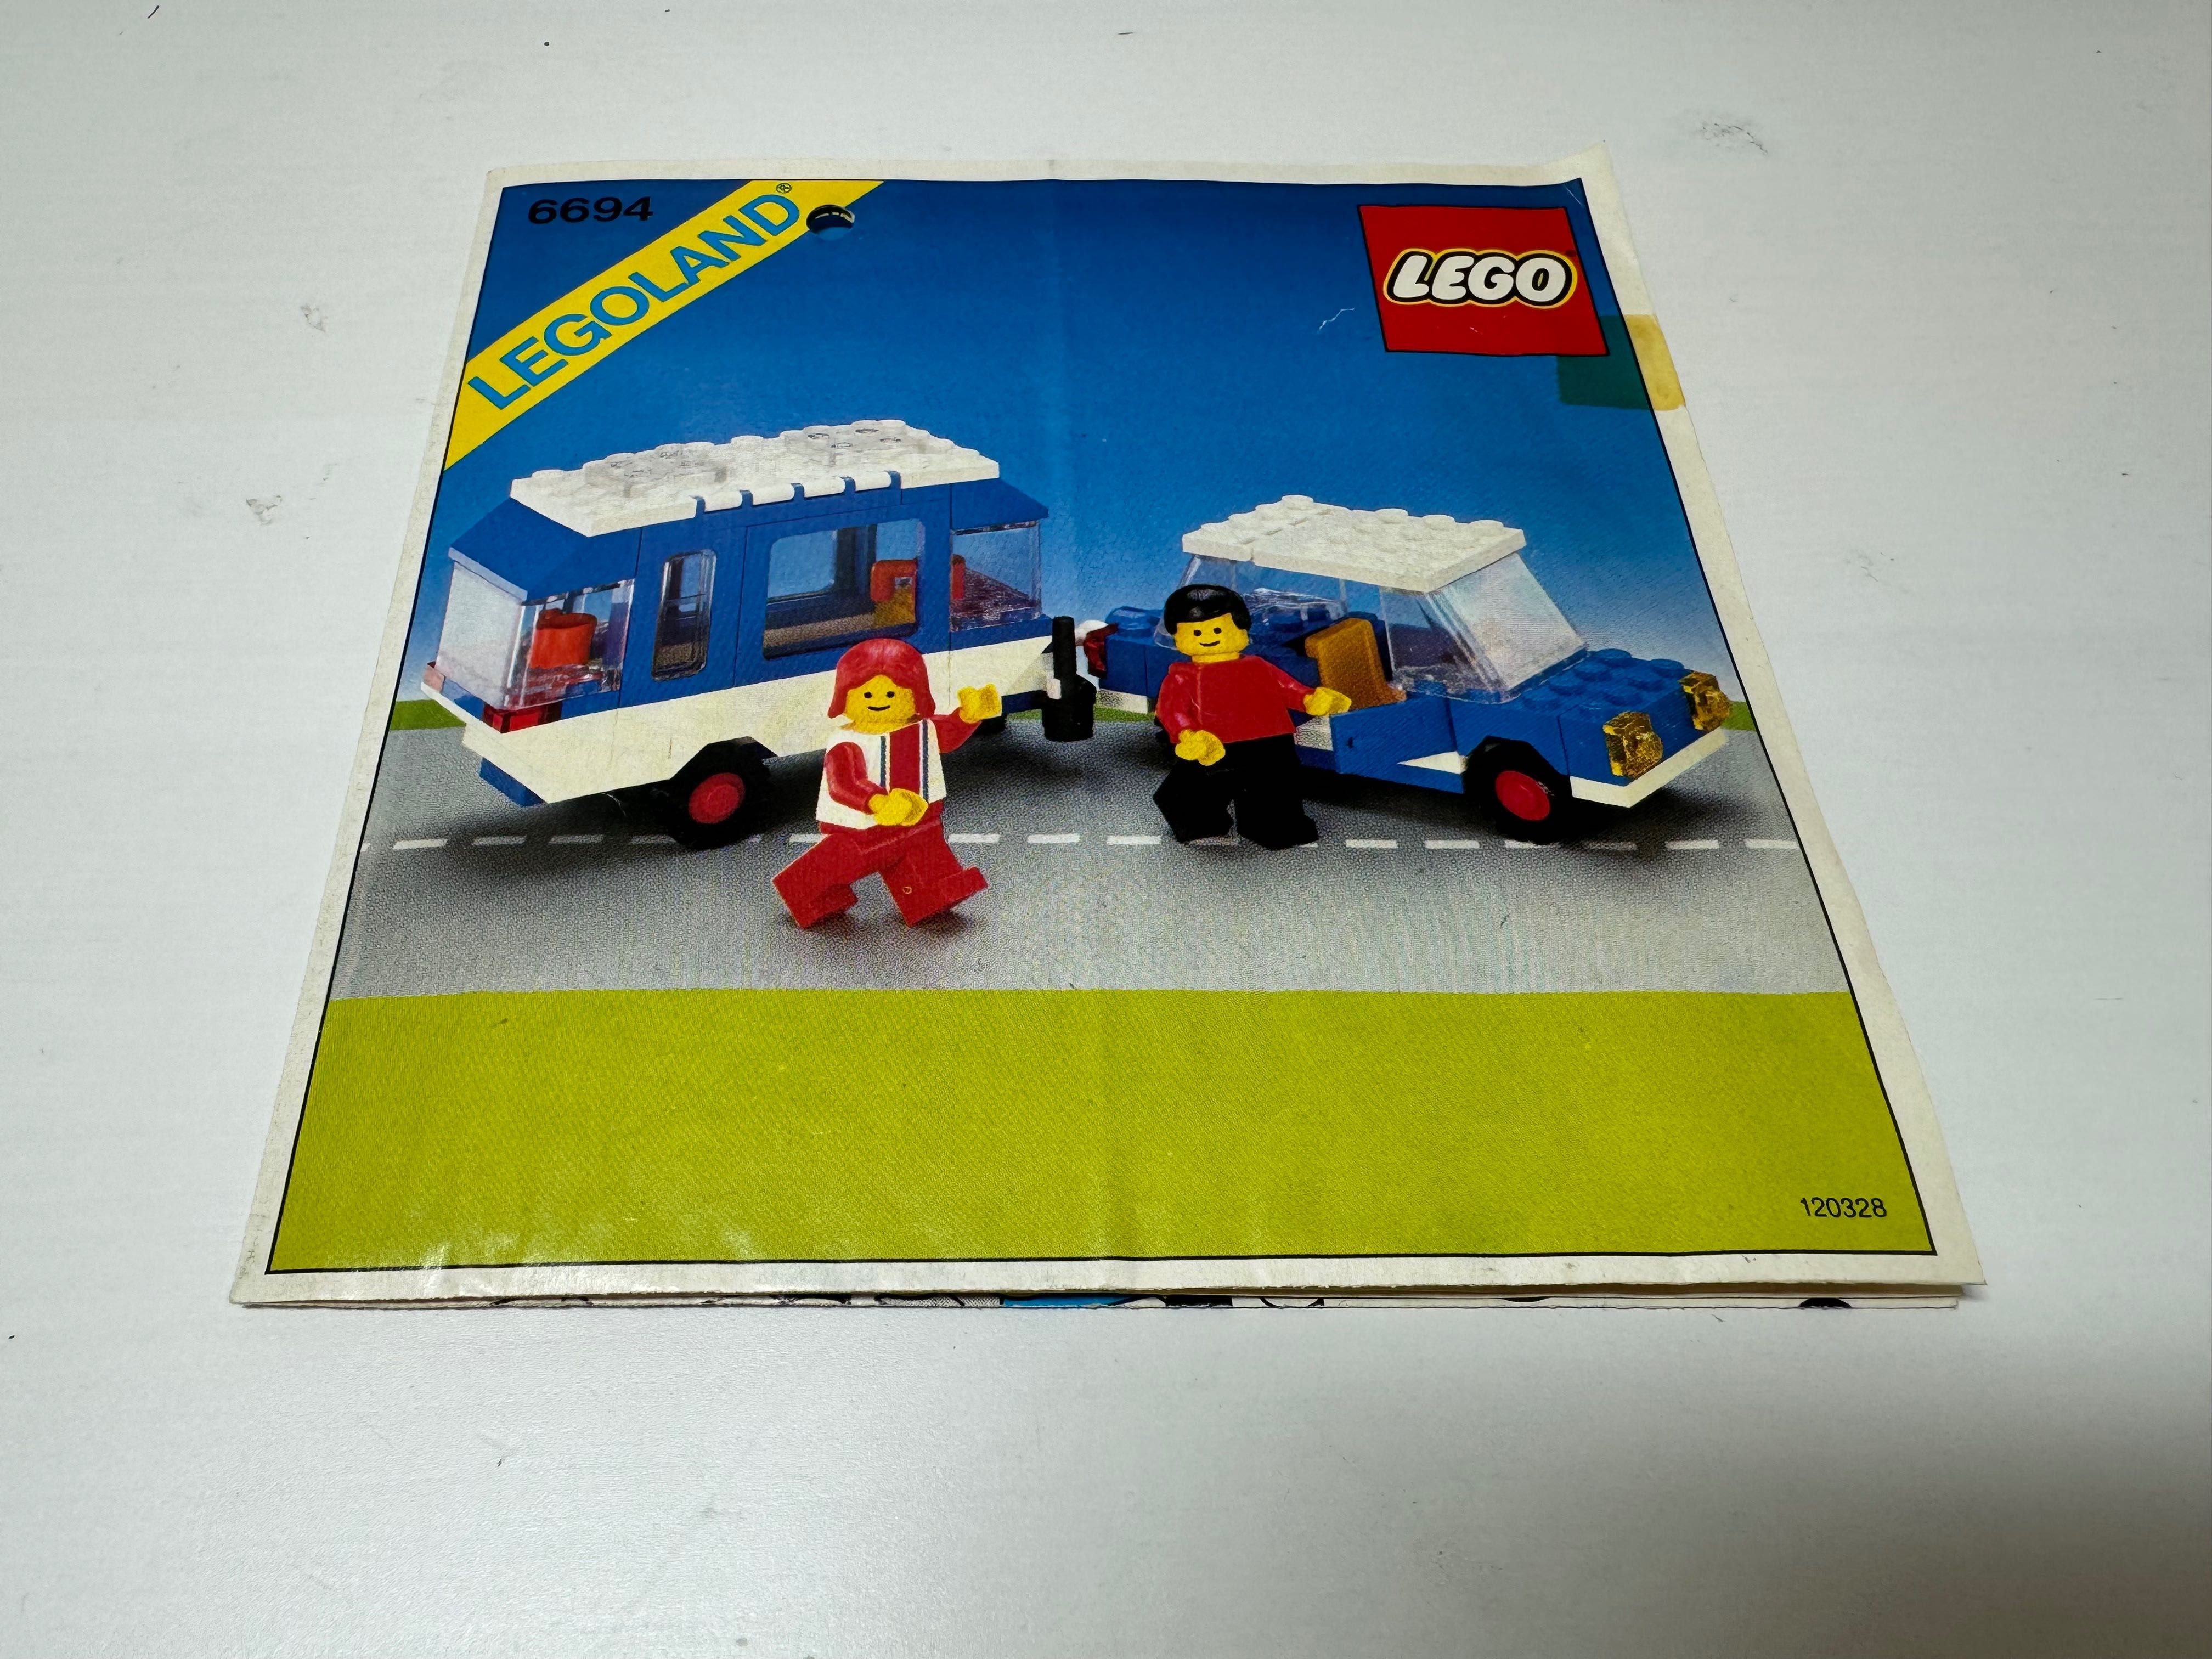 LEGO classic town; zestaw 6694 Car with Camper